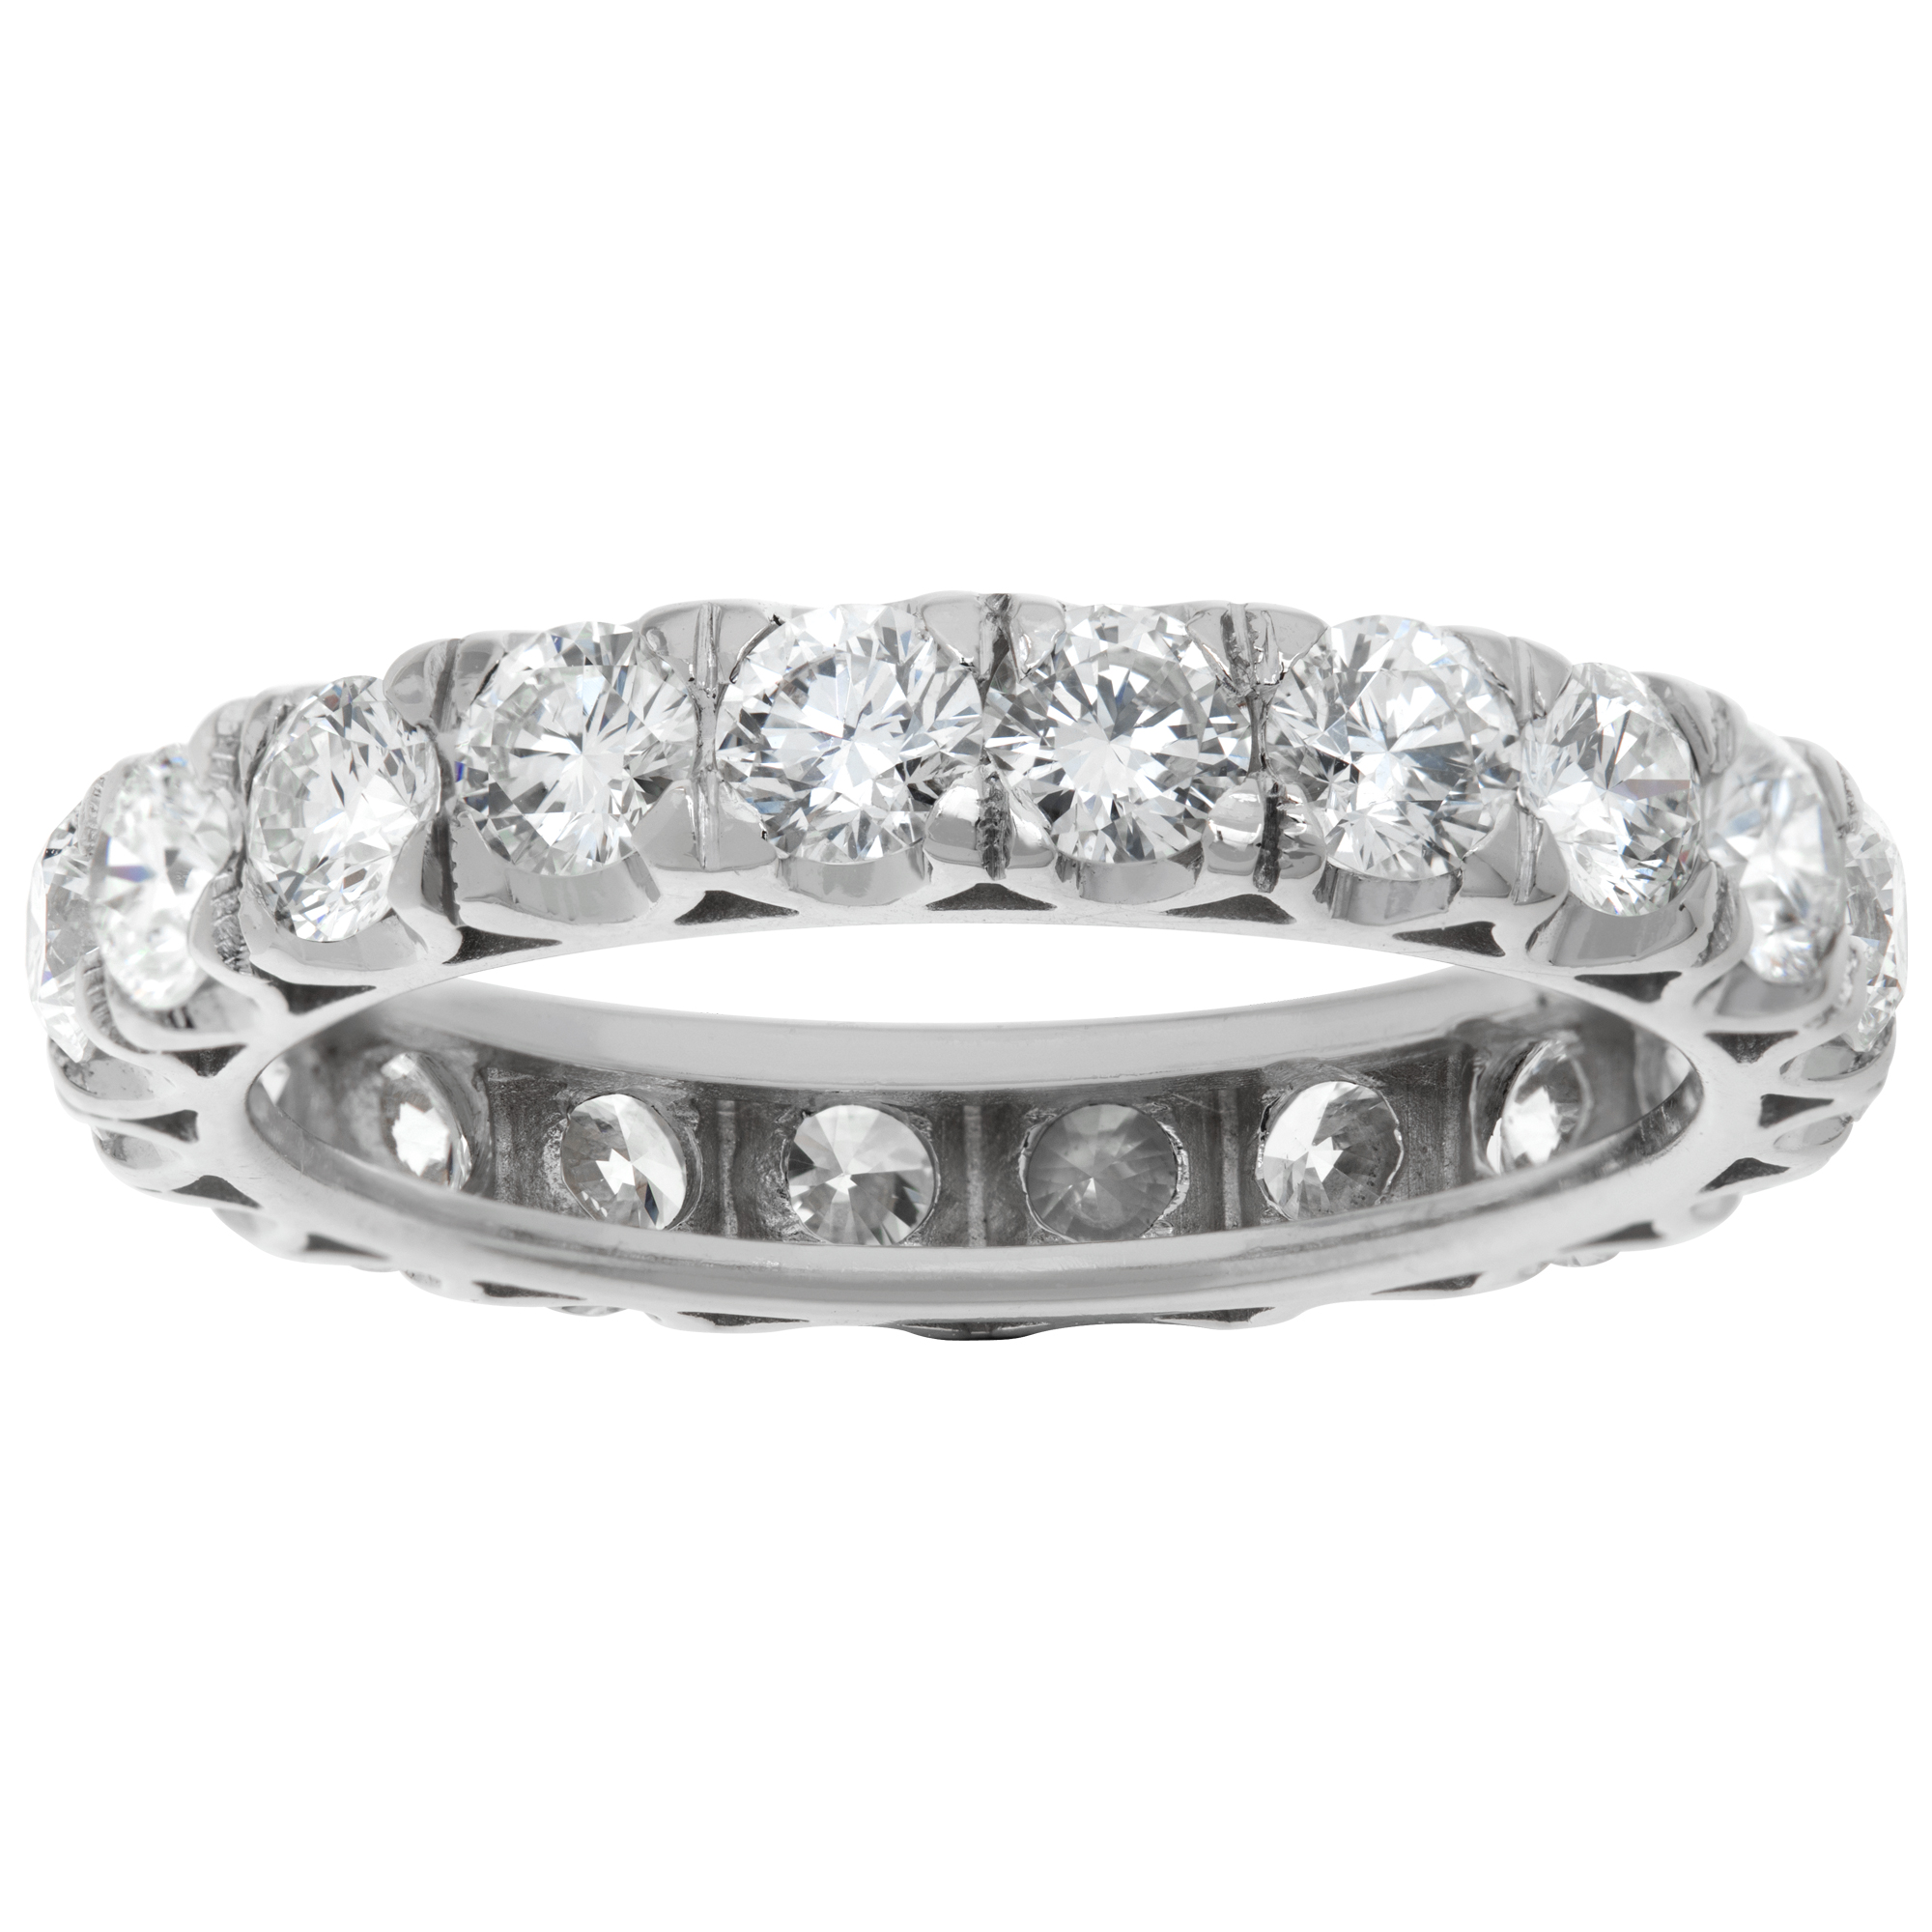 Diamond Eternity band with approximately 3.00 carats round brilliant cut diamond set in 18K white gold. Size 7.